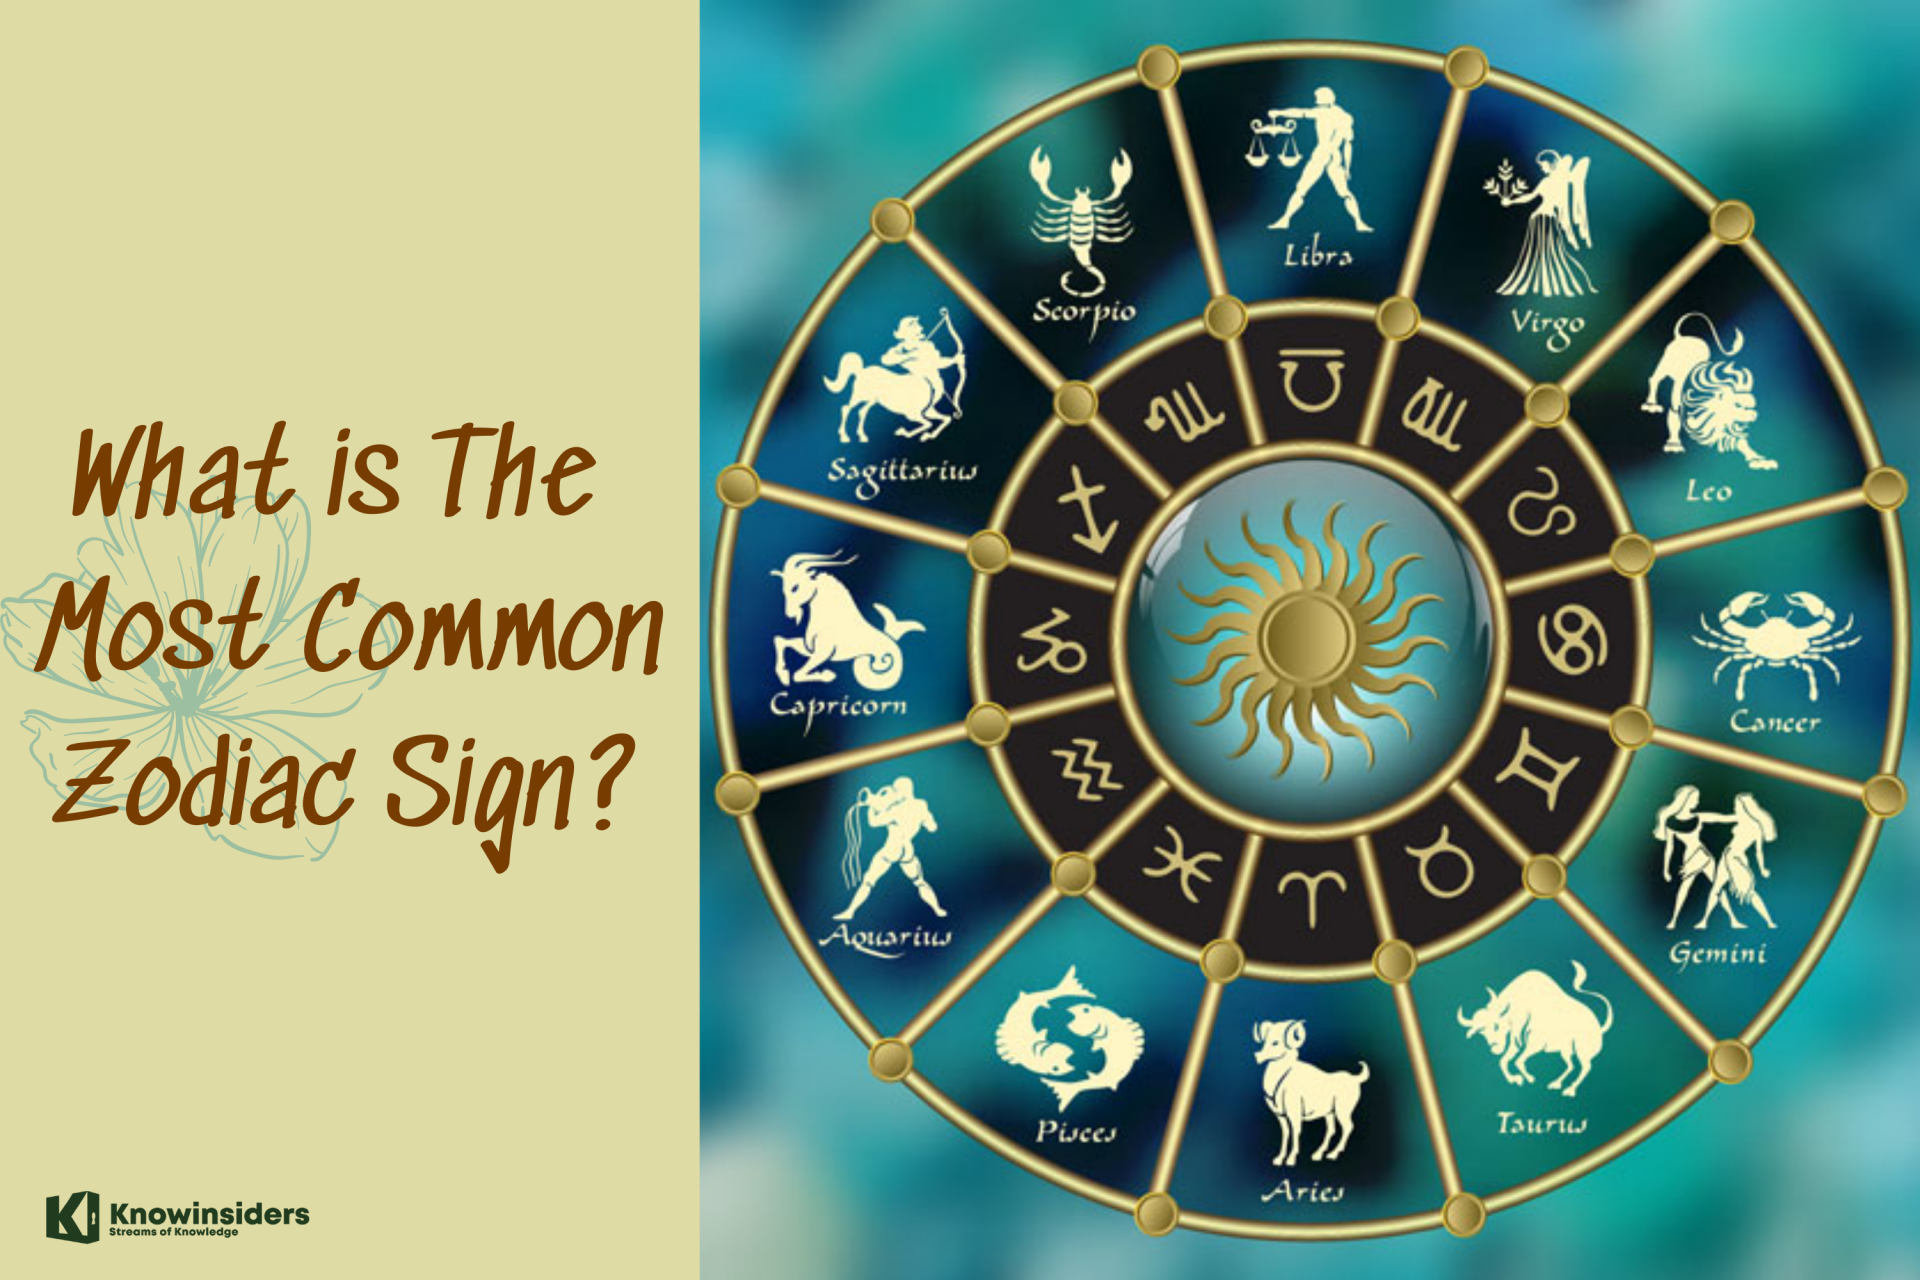 What is The Most Common Zodiac Sign?